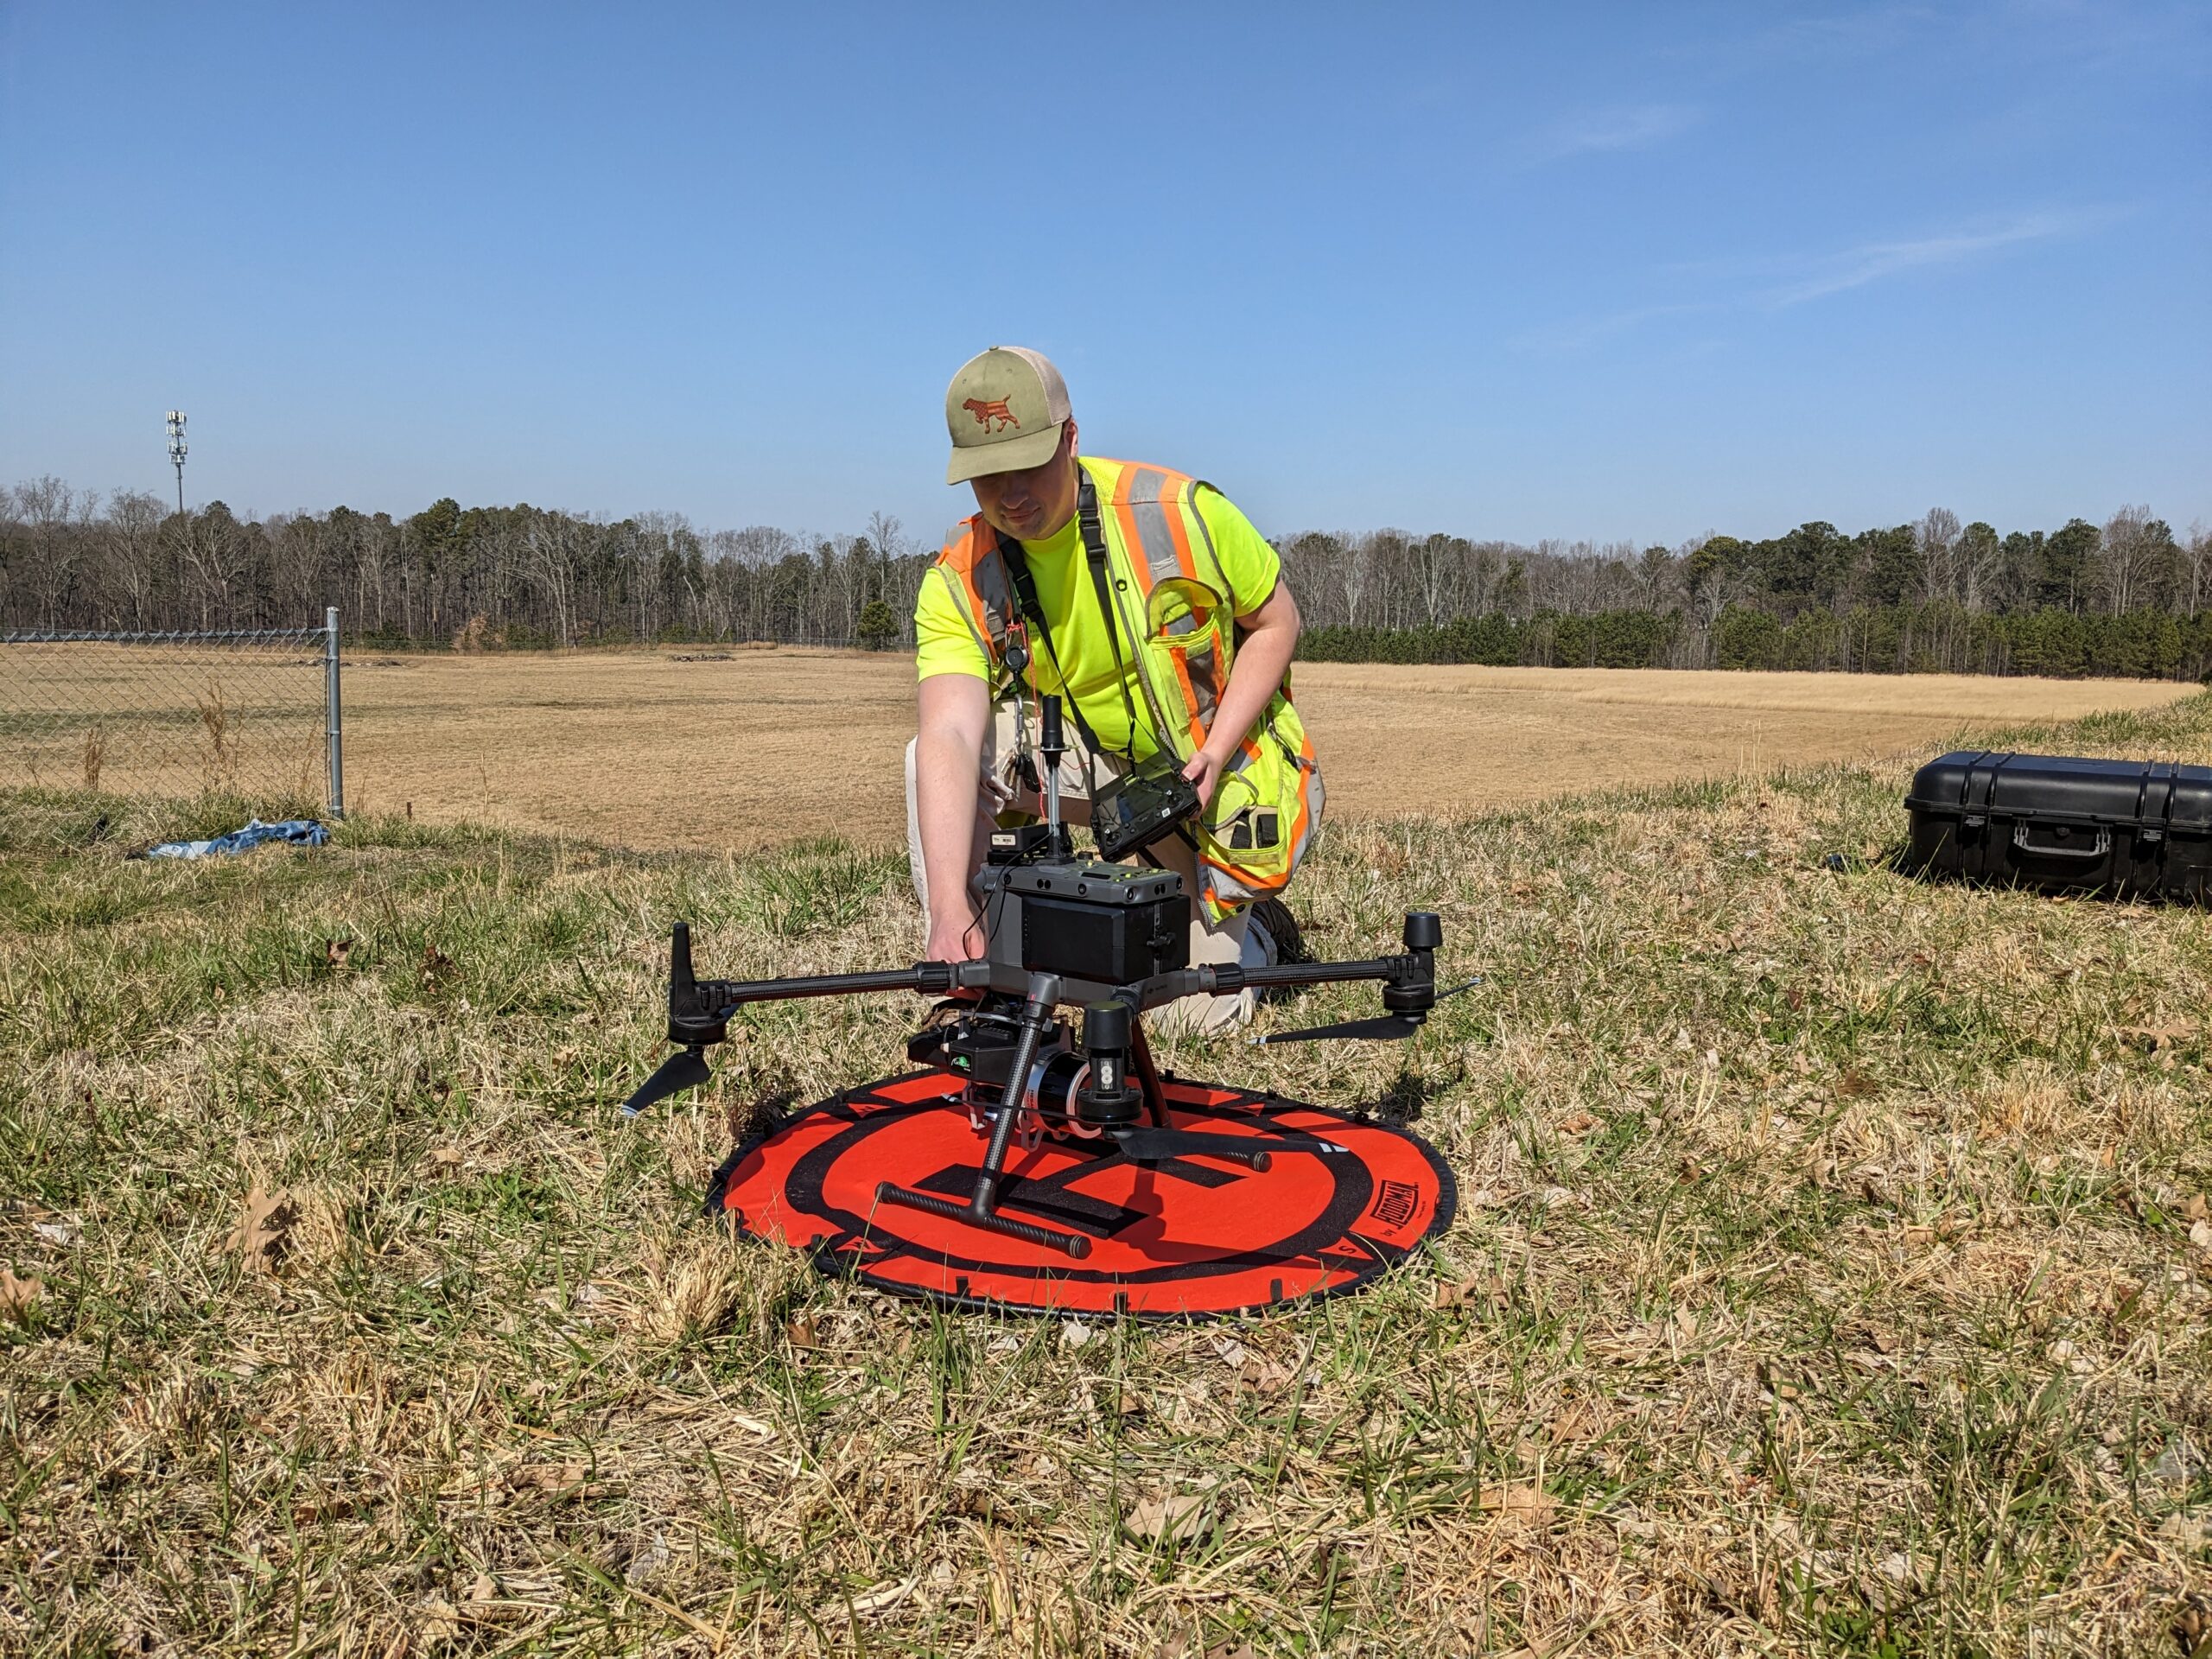 Drone pilot crouching over a surveying drone in an open field.